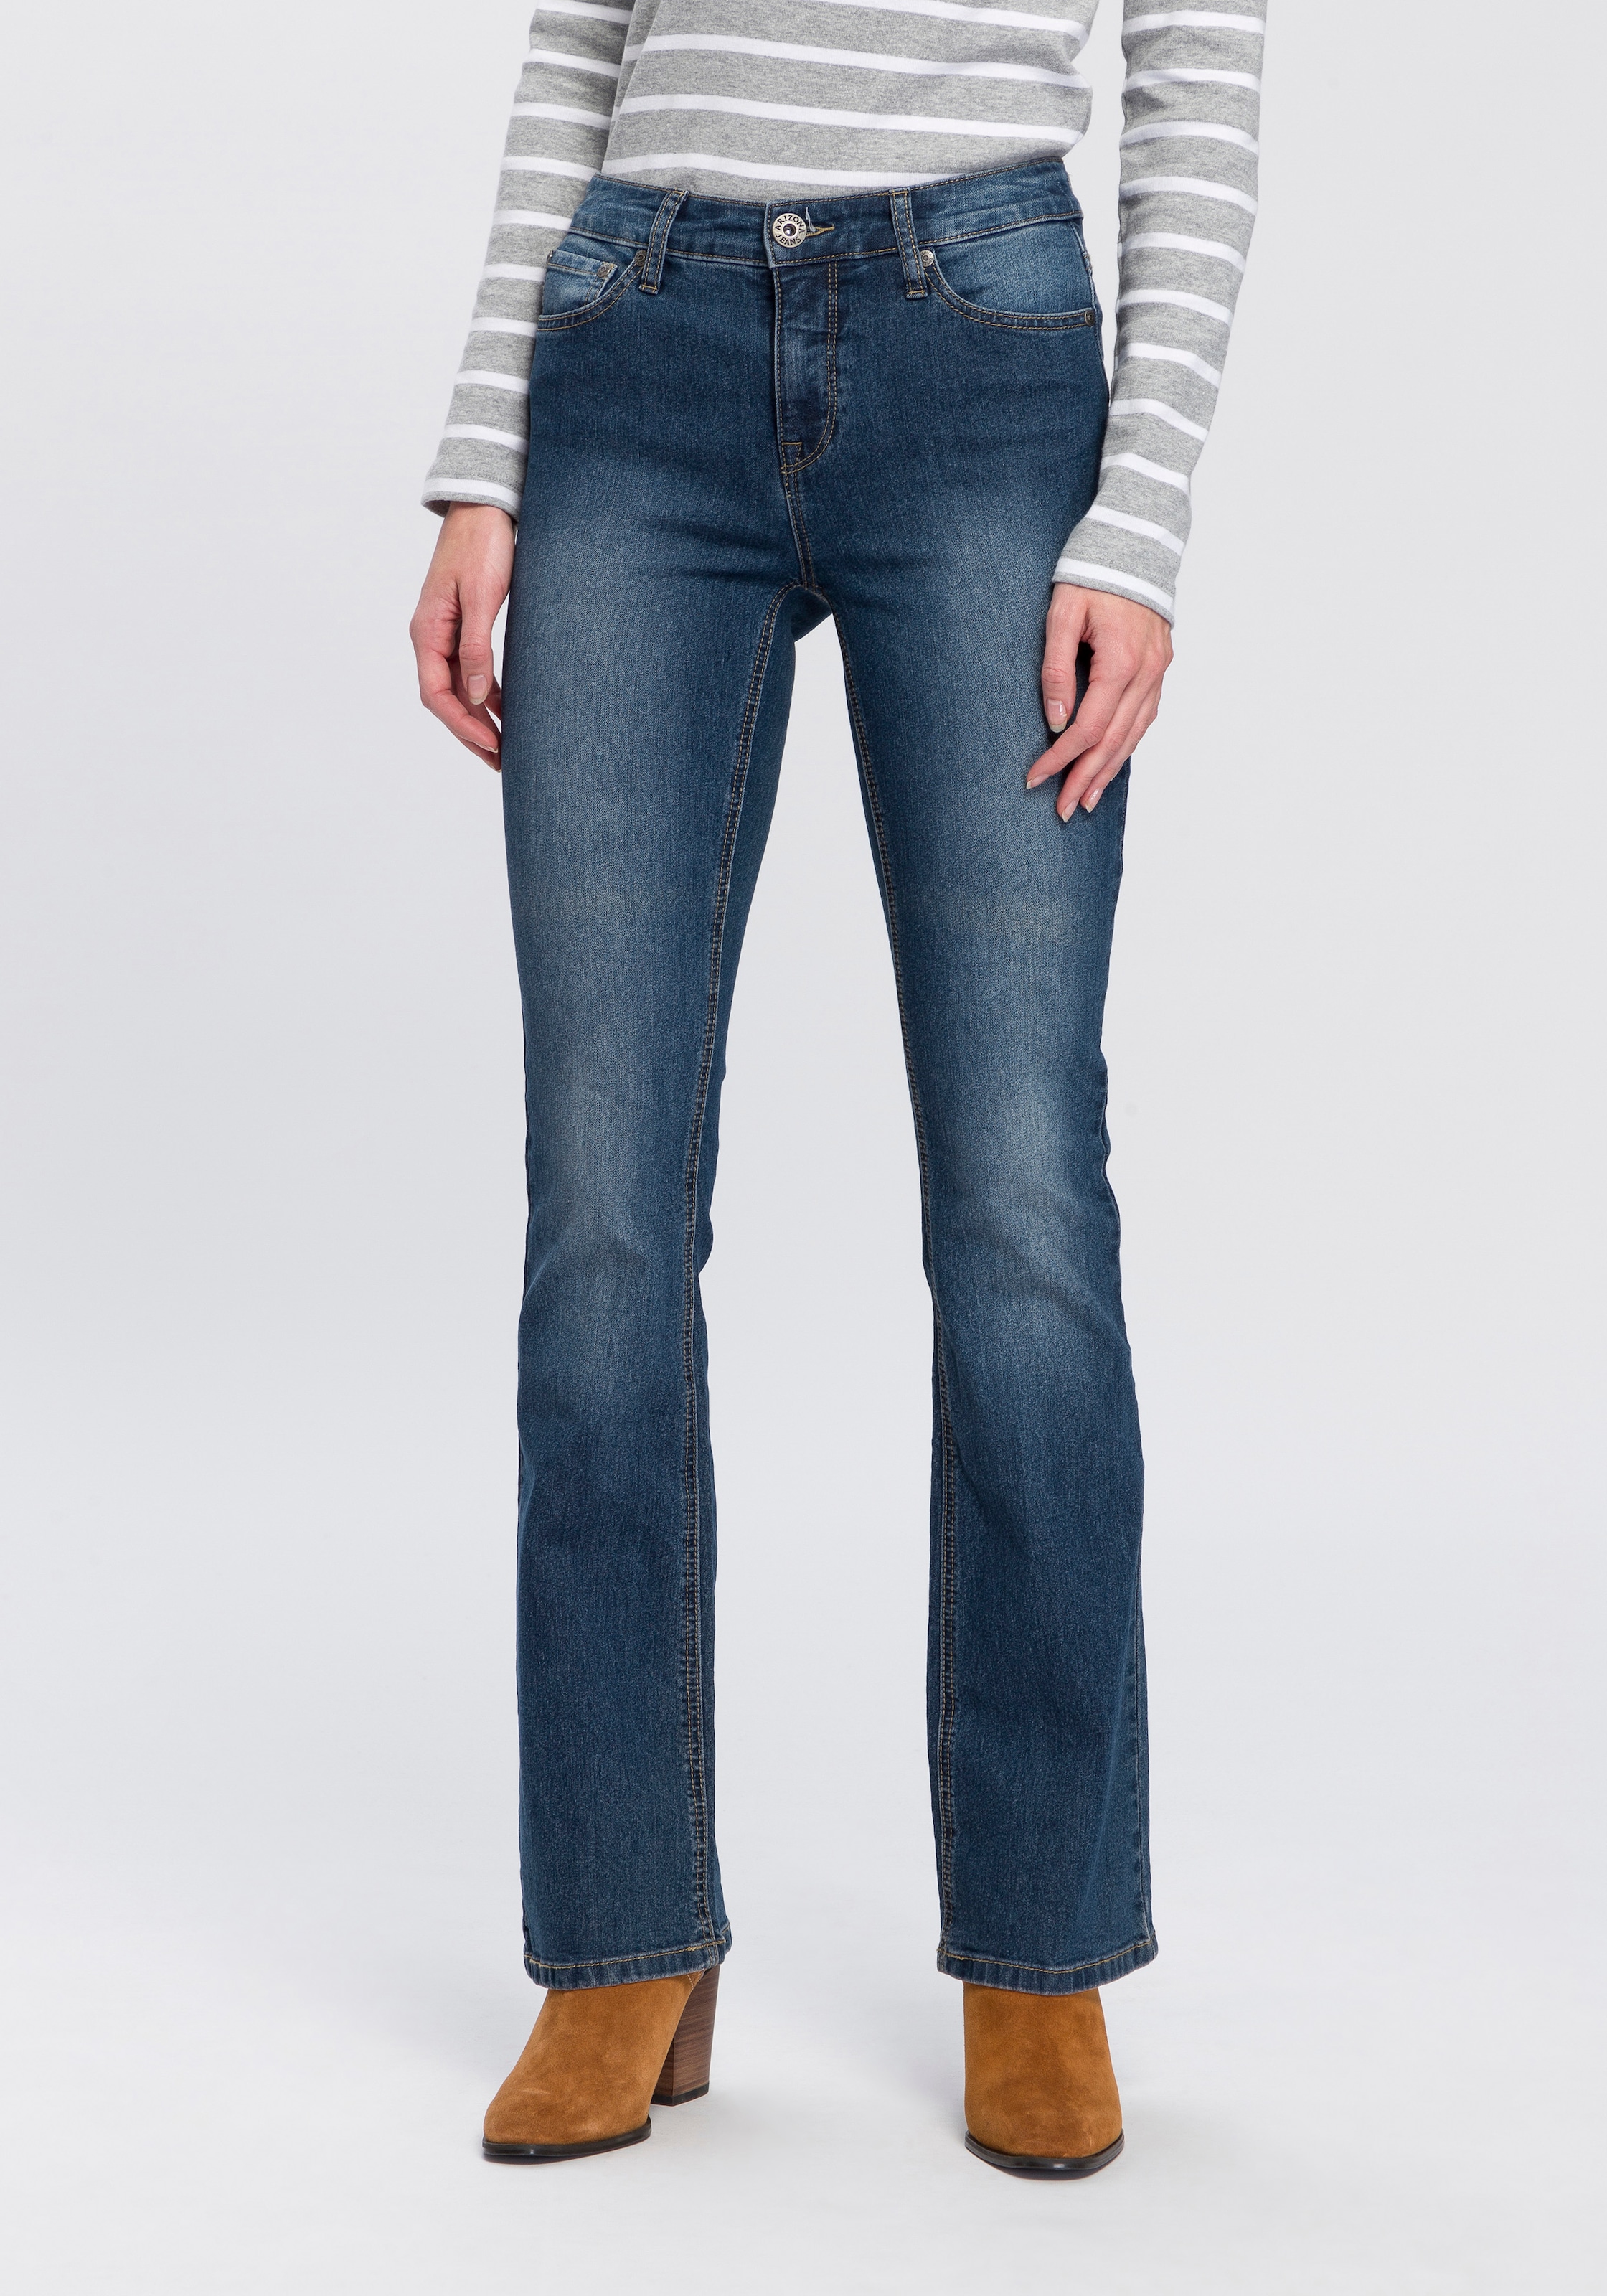 Arizona Bootcut-Jeans »Shaping«, High Waist online kaufen | Stretchjeans